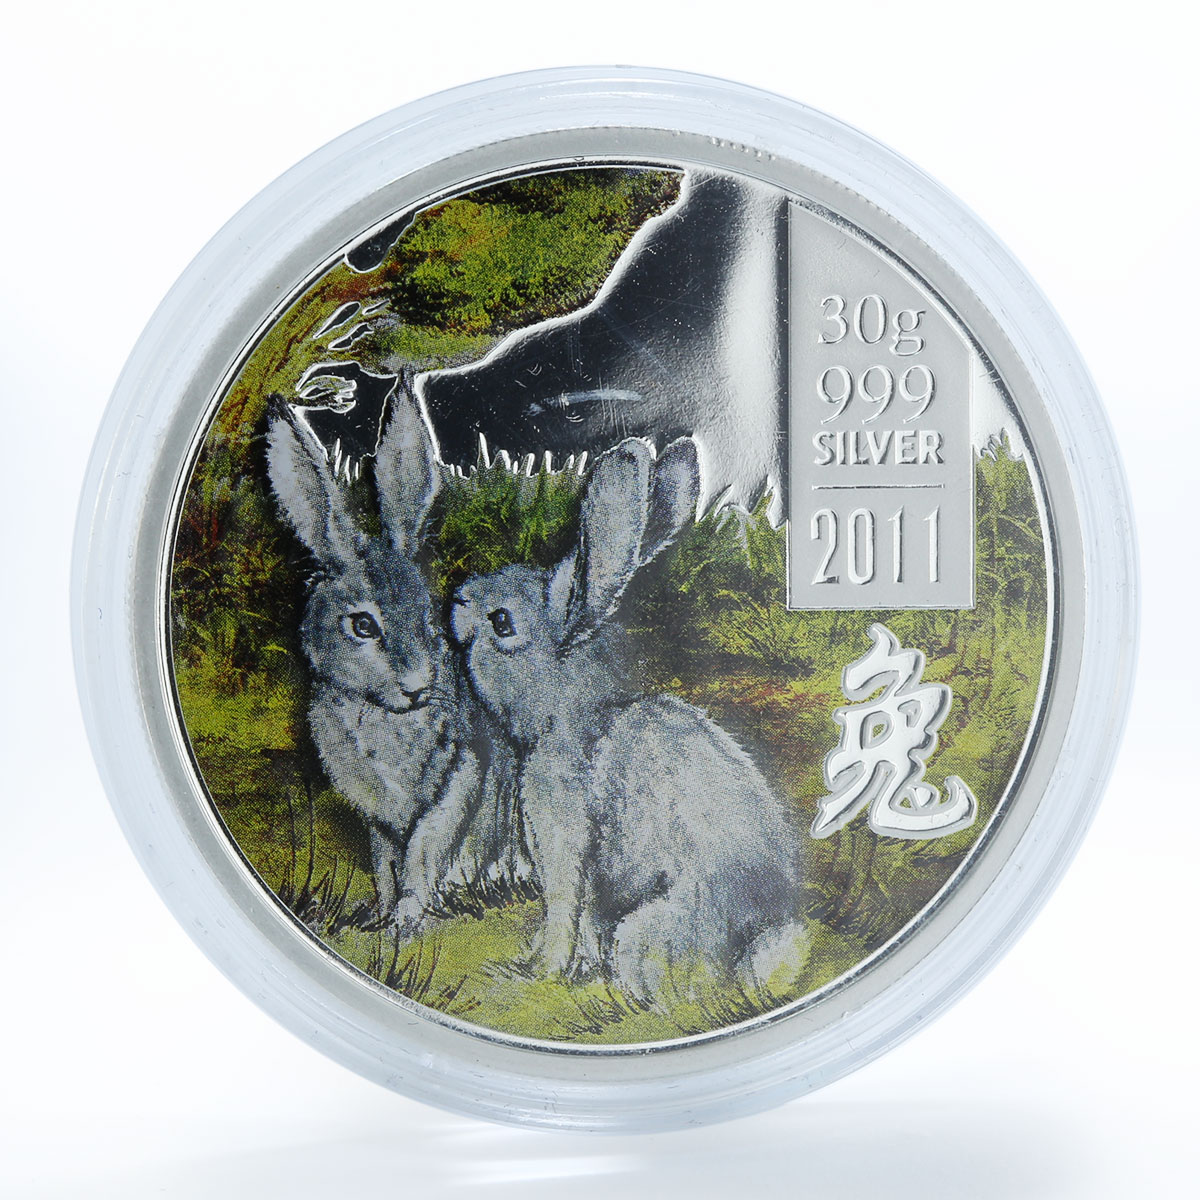 Cook Islands, 5 Dollars, Year of the Rabbit 2011, 30 grams Silver coin Coloured